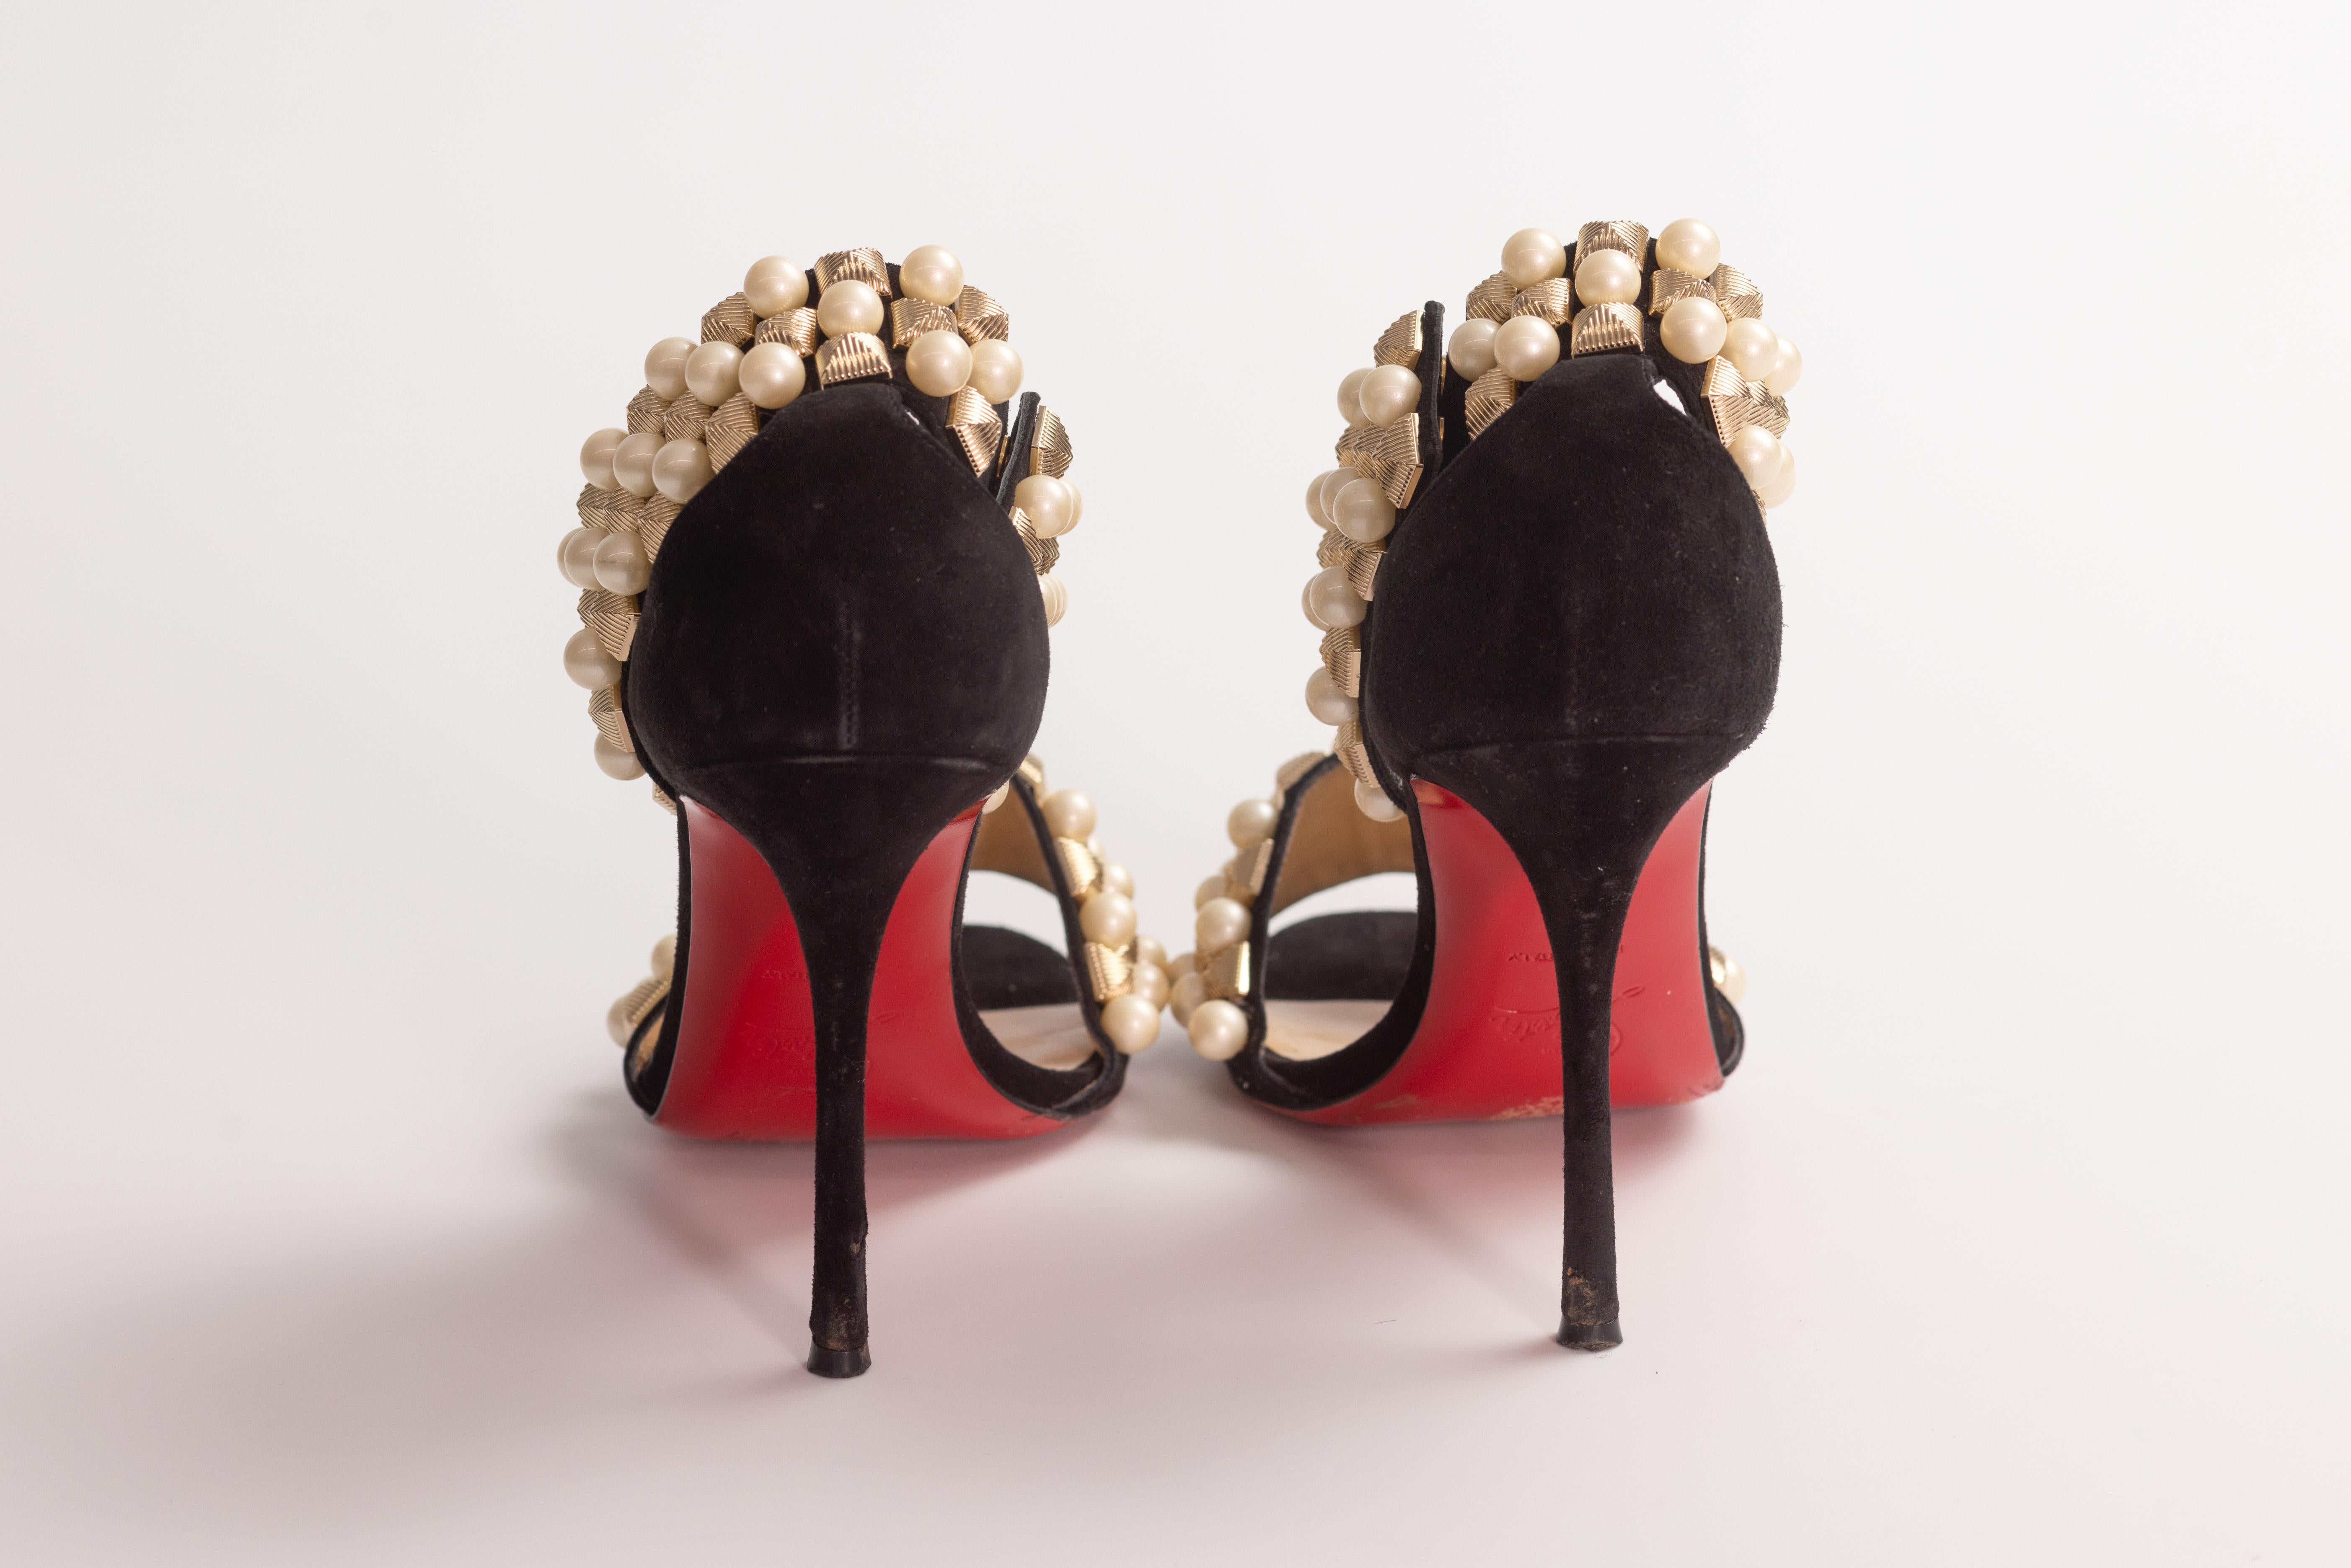 Christian Louboutin Studs Pearls Black Velvet Tudor Heels (EU 39) In Good Condition For Sale In Montreal, Quebec